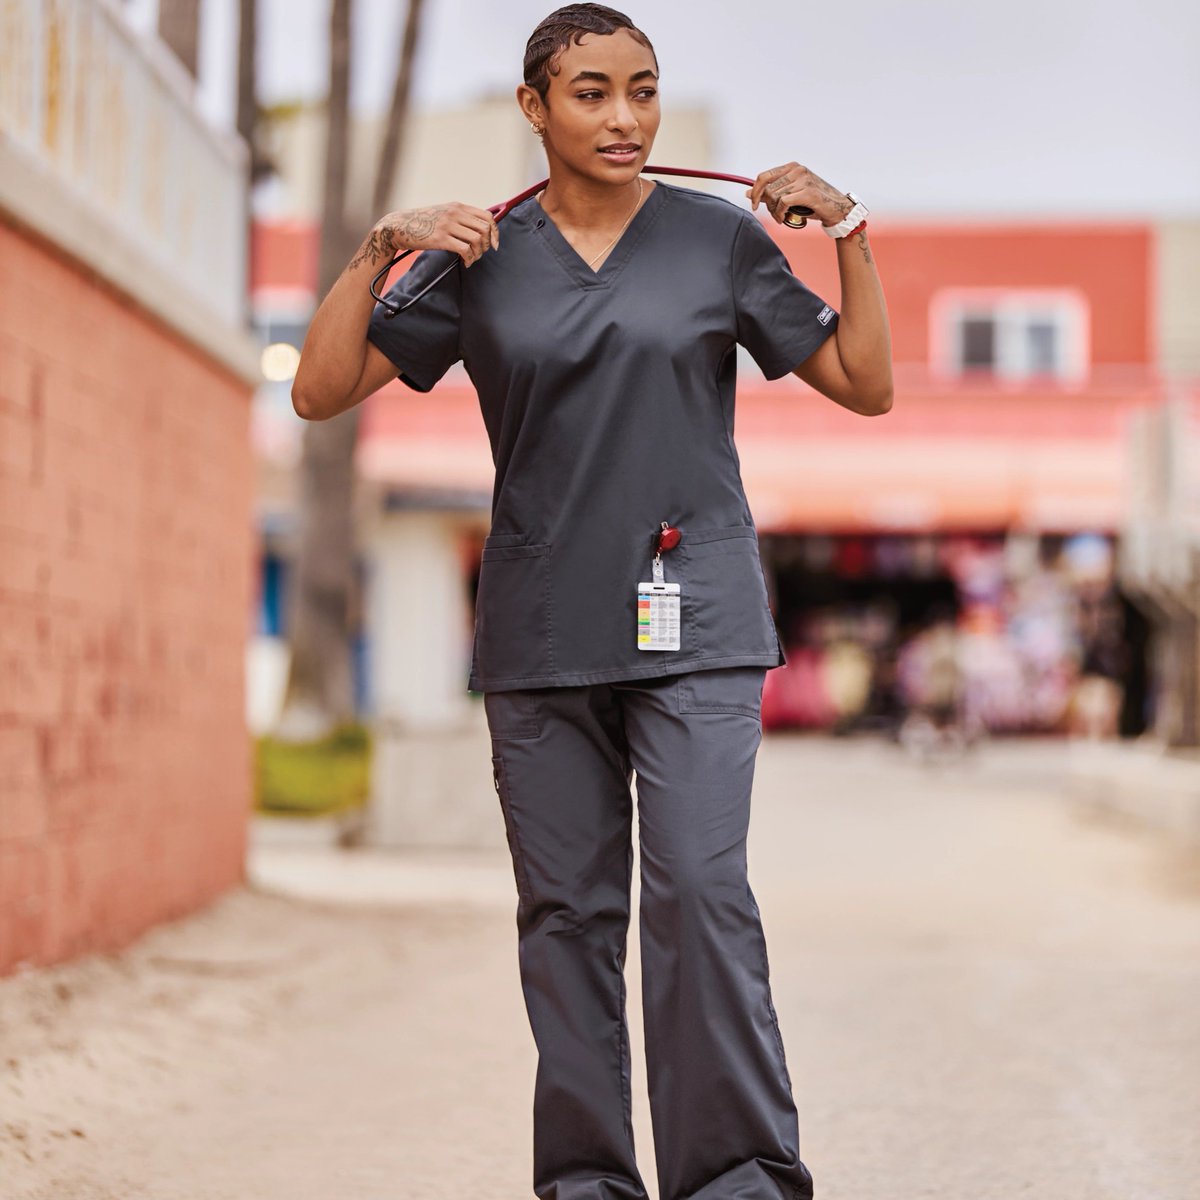 Cool, chic, and ready to care! Embrace the sleek style of grey scrubs that'll make you the envy of the ward. 
.
.
.
.
.
#GreyScrubs #FashionableCaregiving #SleekAndStylish #HealthcareFashion #CareWithFlair #ScrubHaven